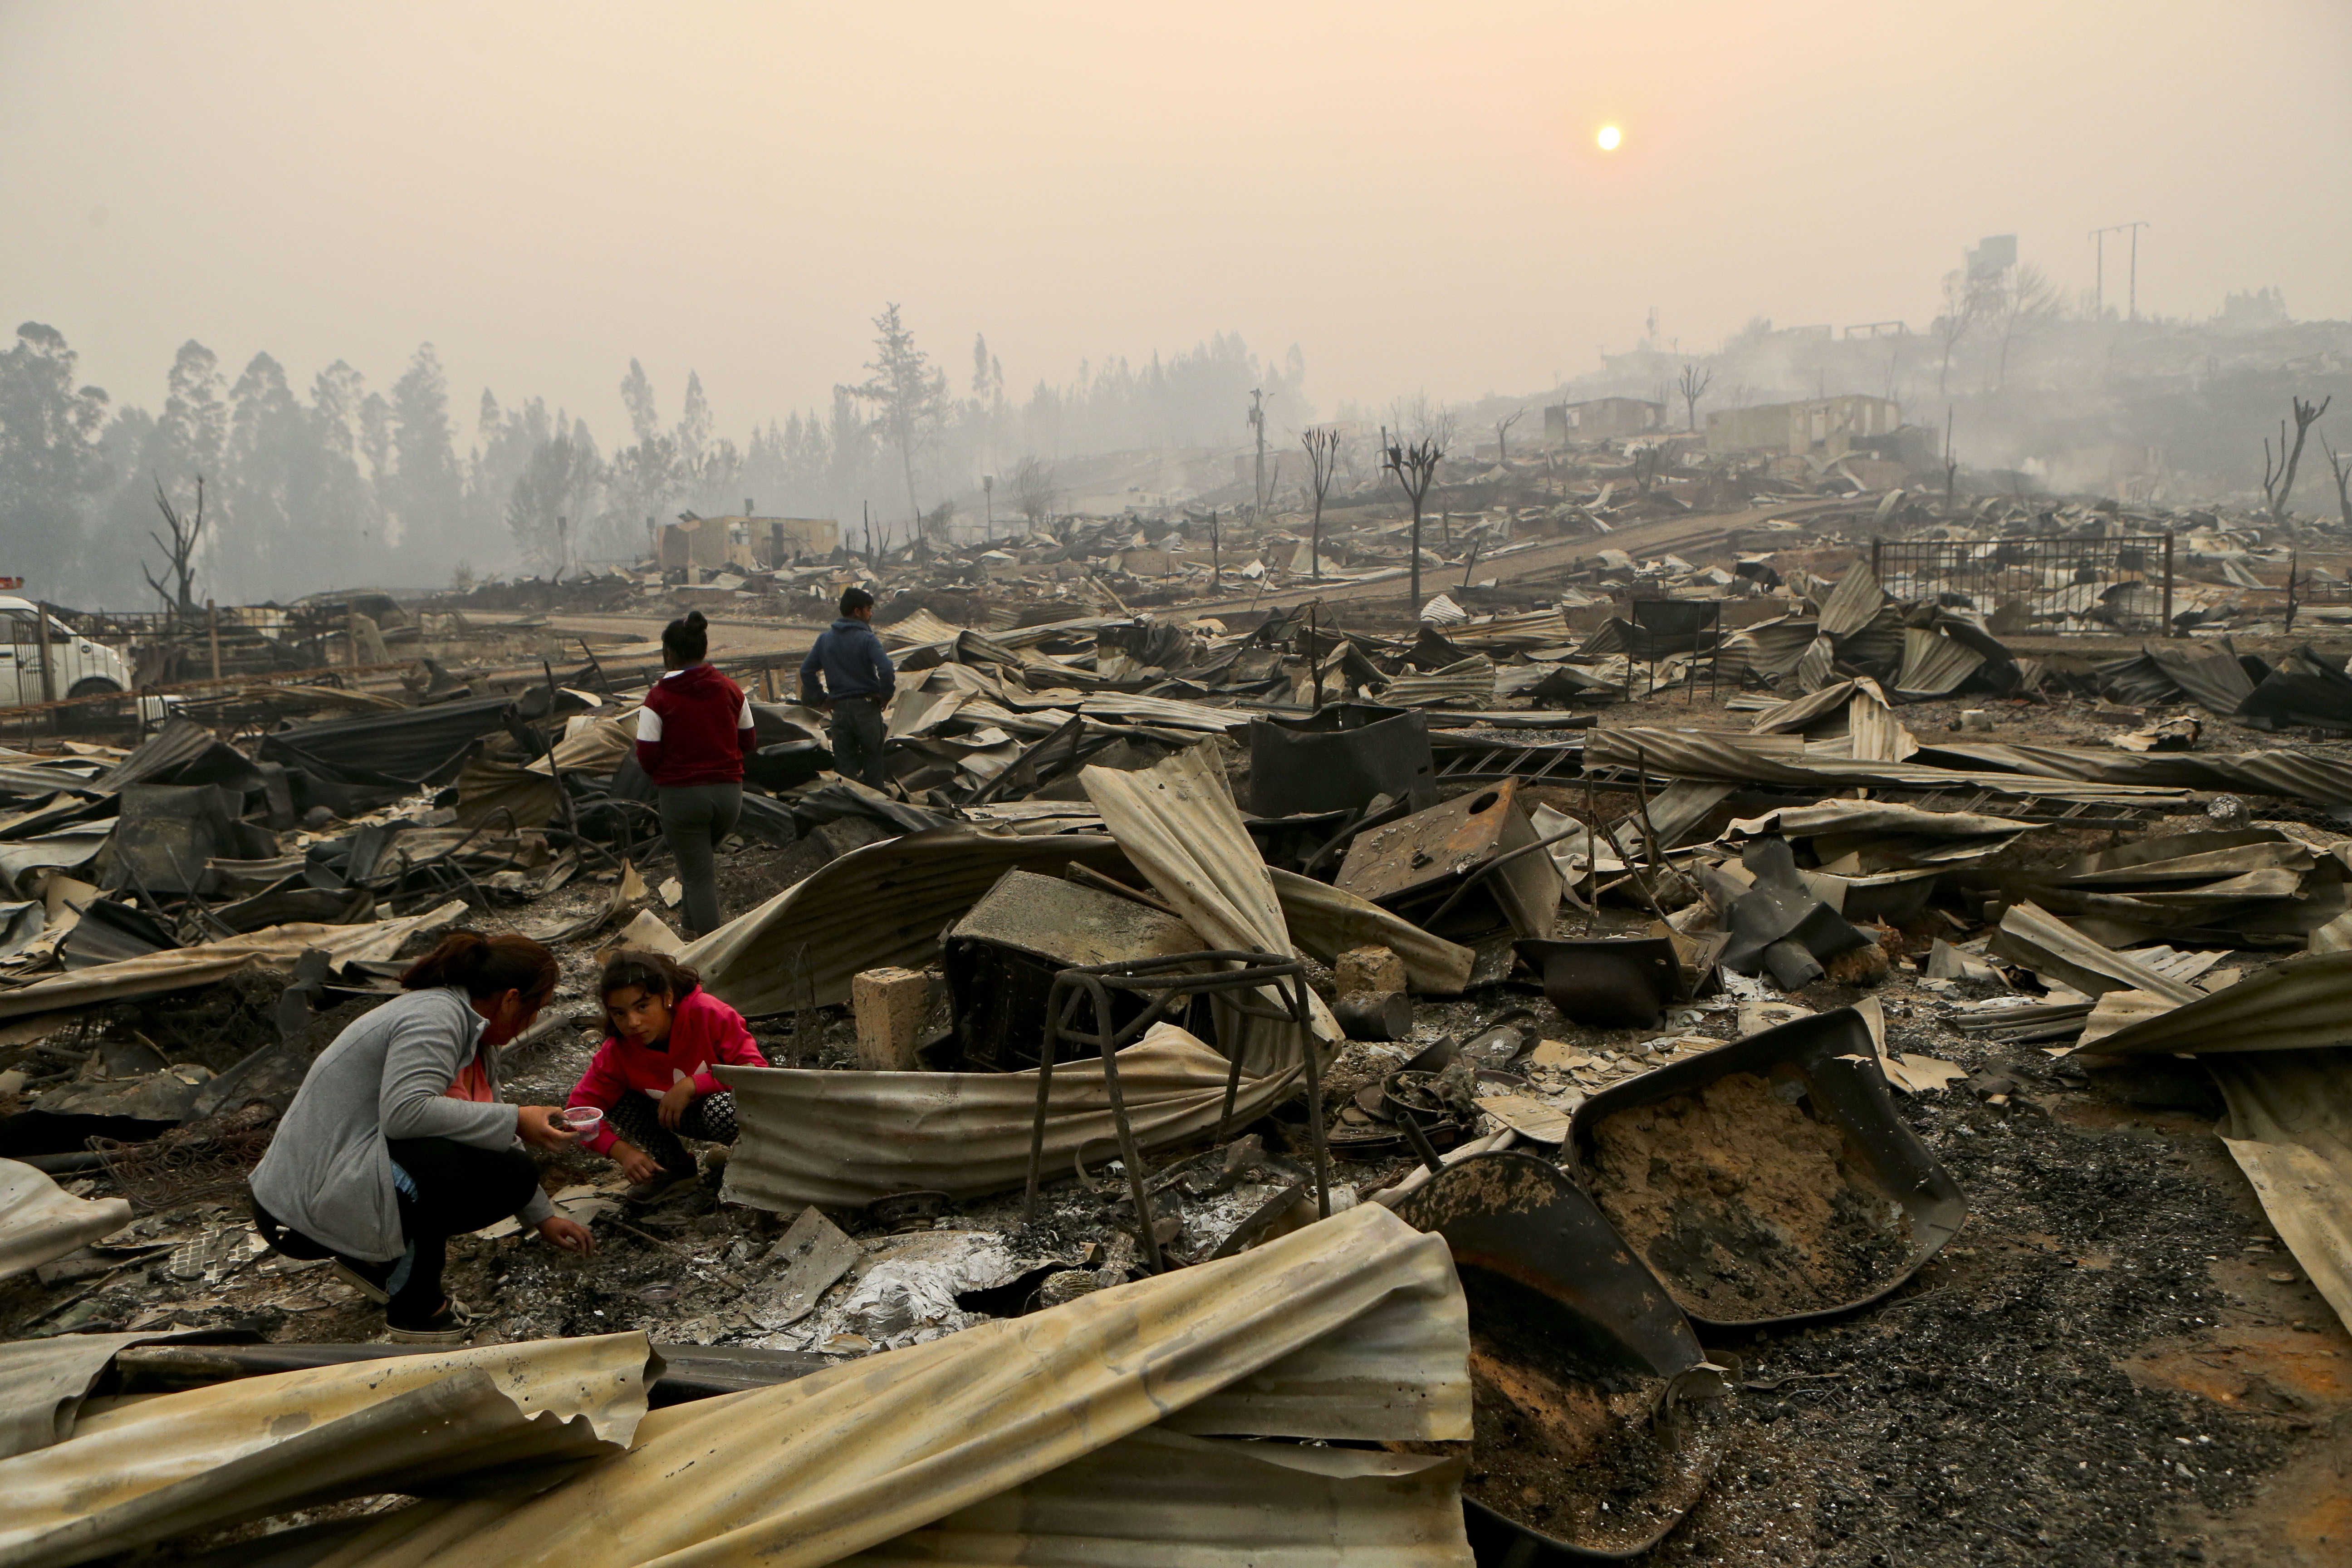 The Vega Salinas family searches what's left of their fire-destroyed home in Santa Olga, Chile, Thursday, Jan. 26, 2017. Officials say the town was consumed by the country's worst wildfires, engulfing the post office, a kindergarten and hundreds of homes. (AP Photo/Esteban Felix)